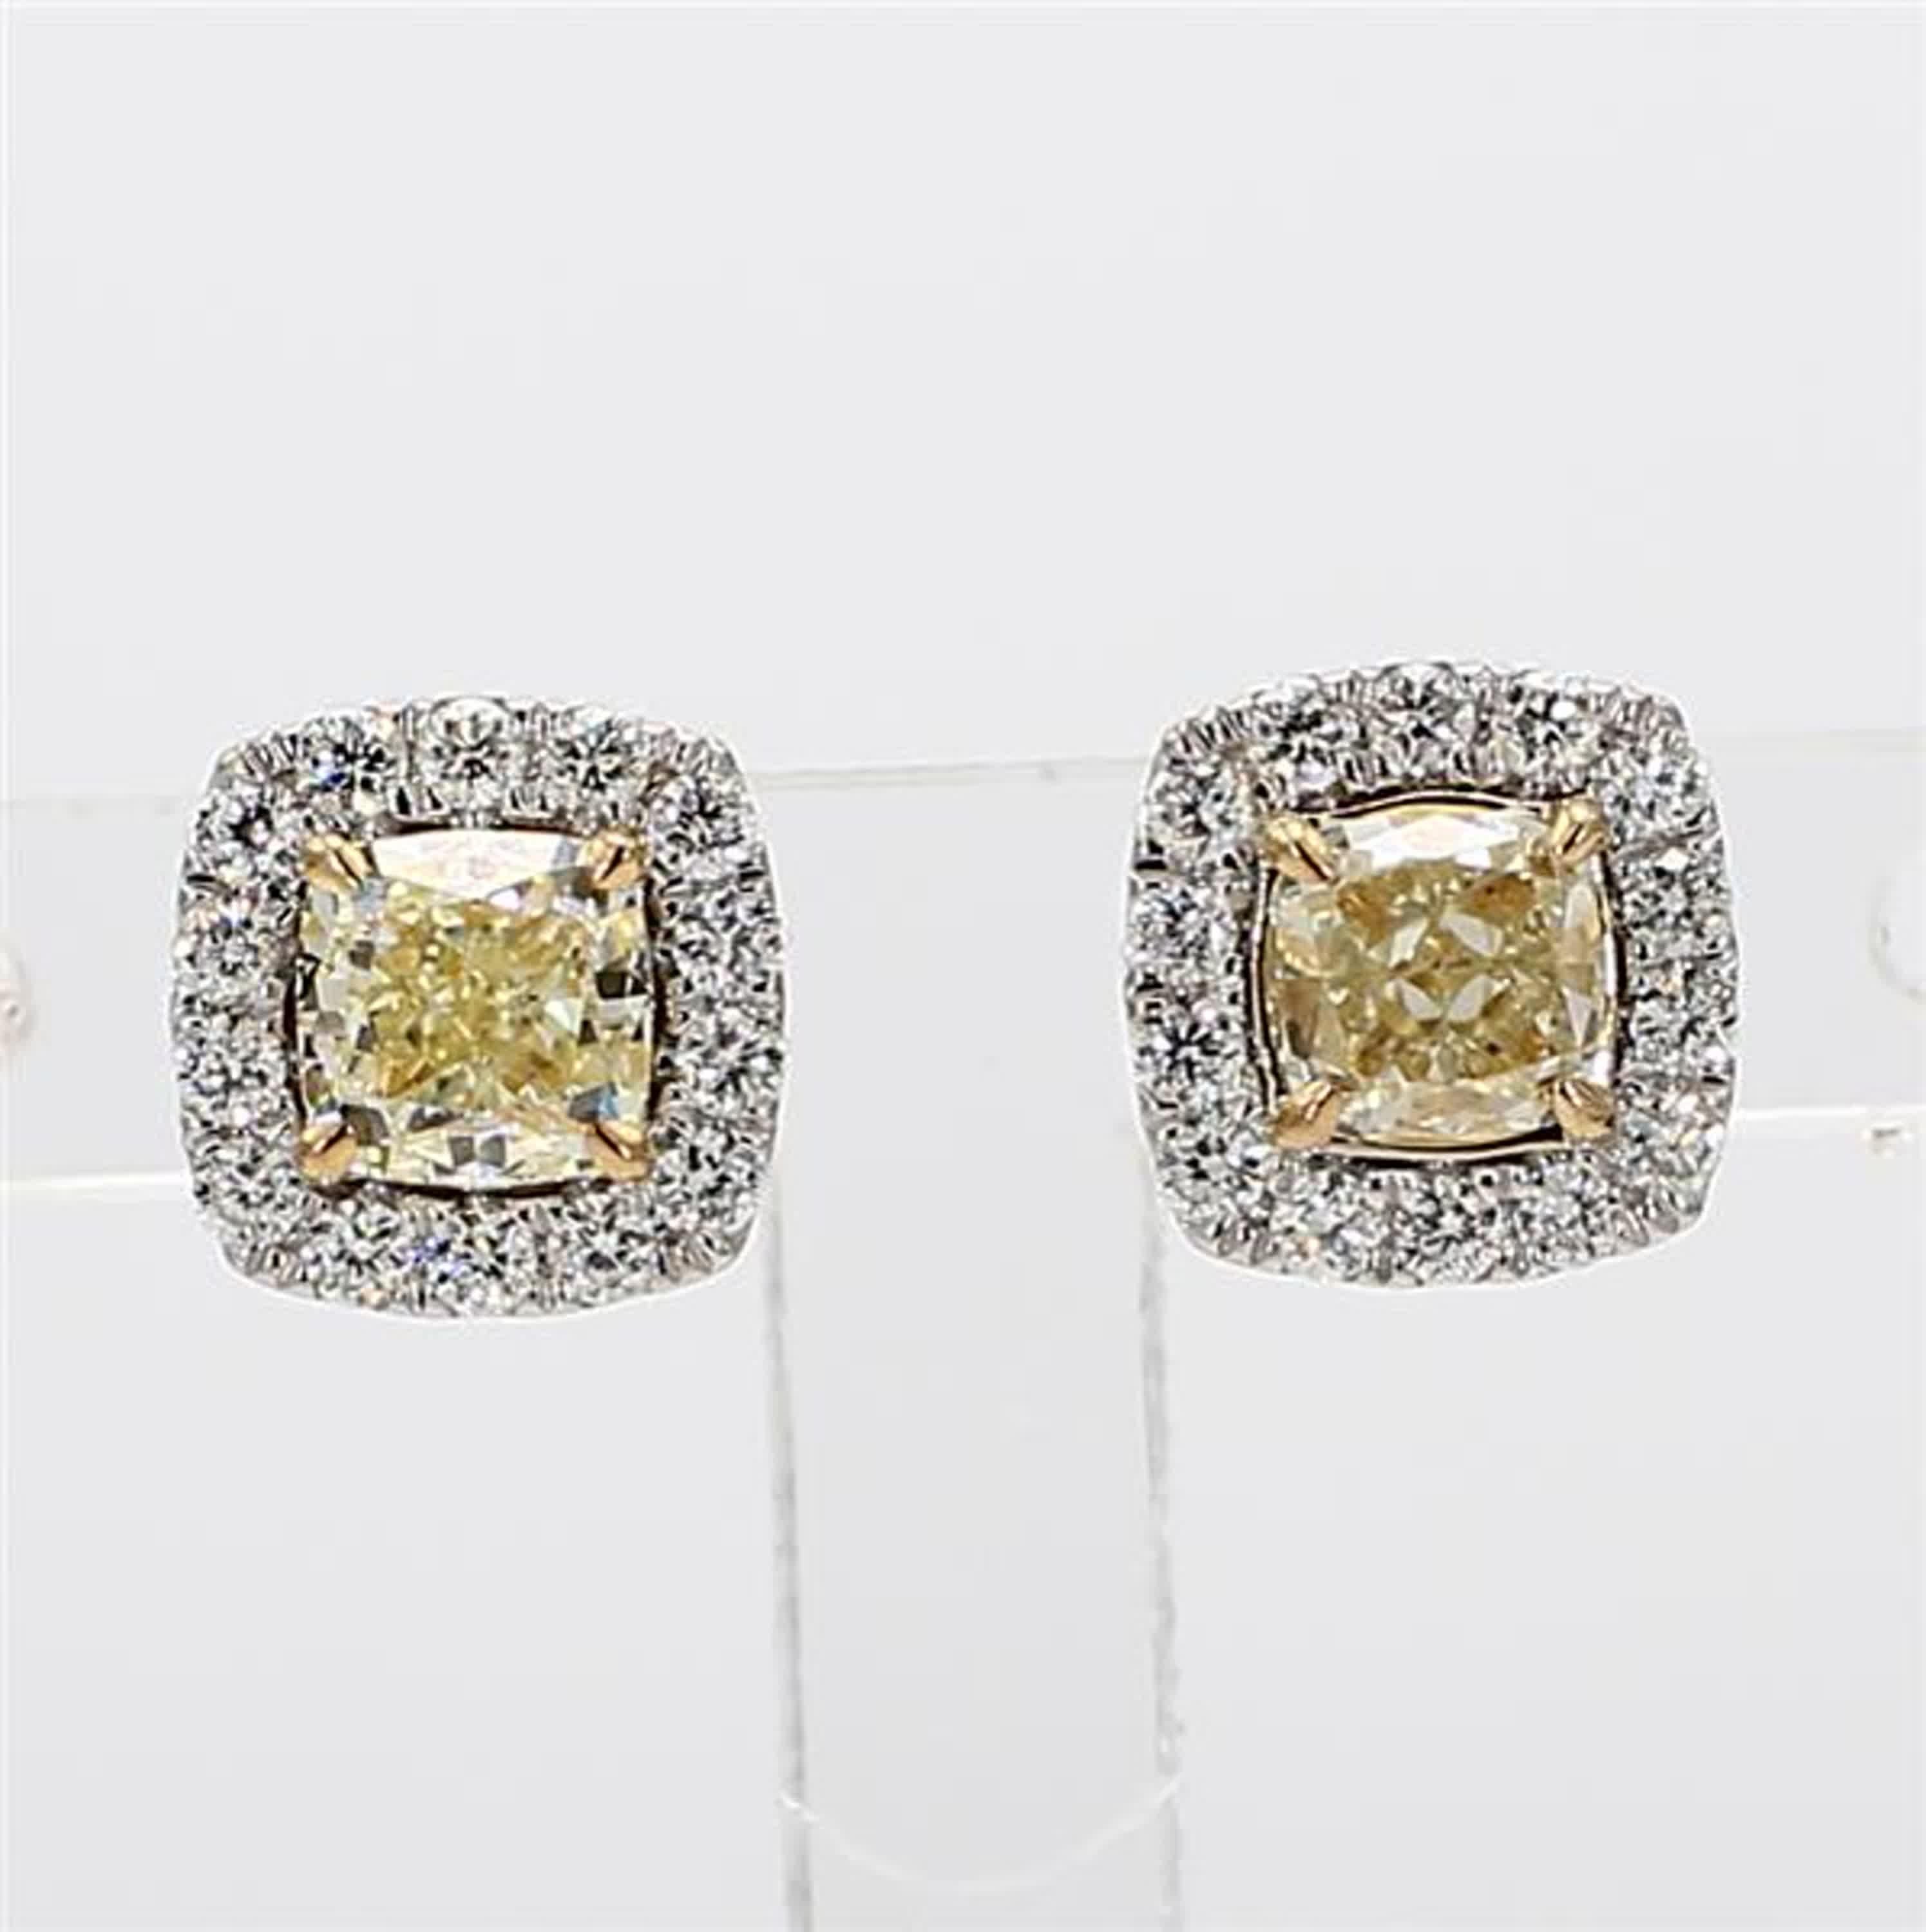 Natural Yellow Cushion and White Diamond 1.25 Carat TW Gold Stud Earrings 2